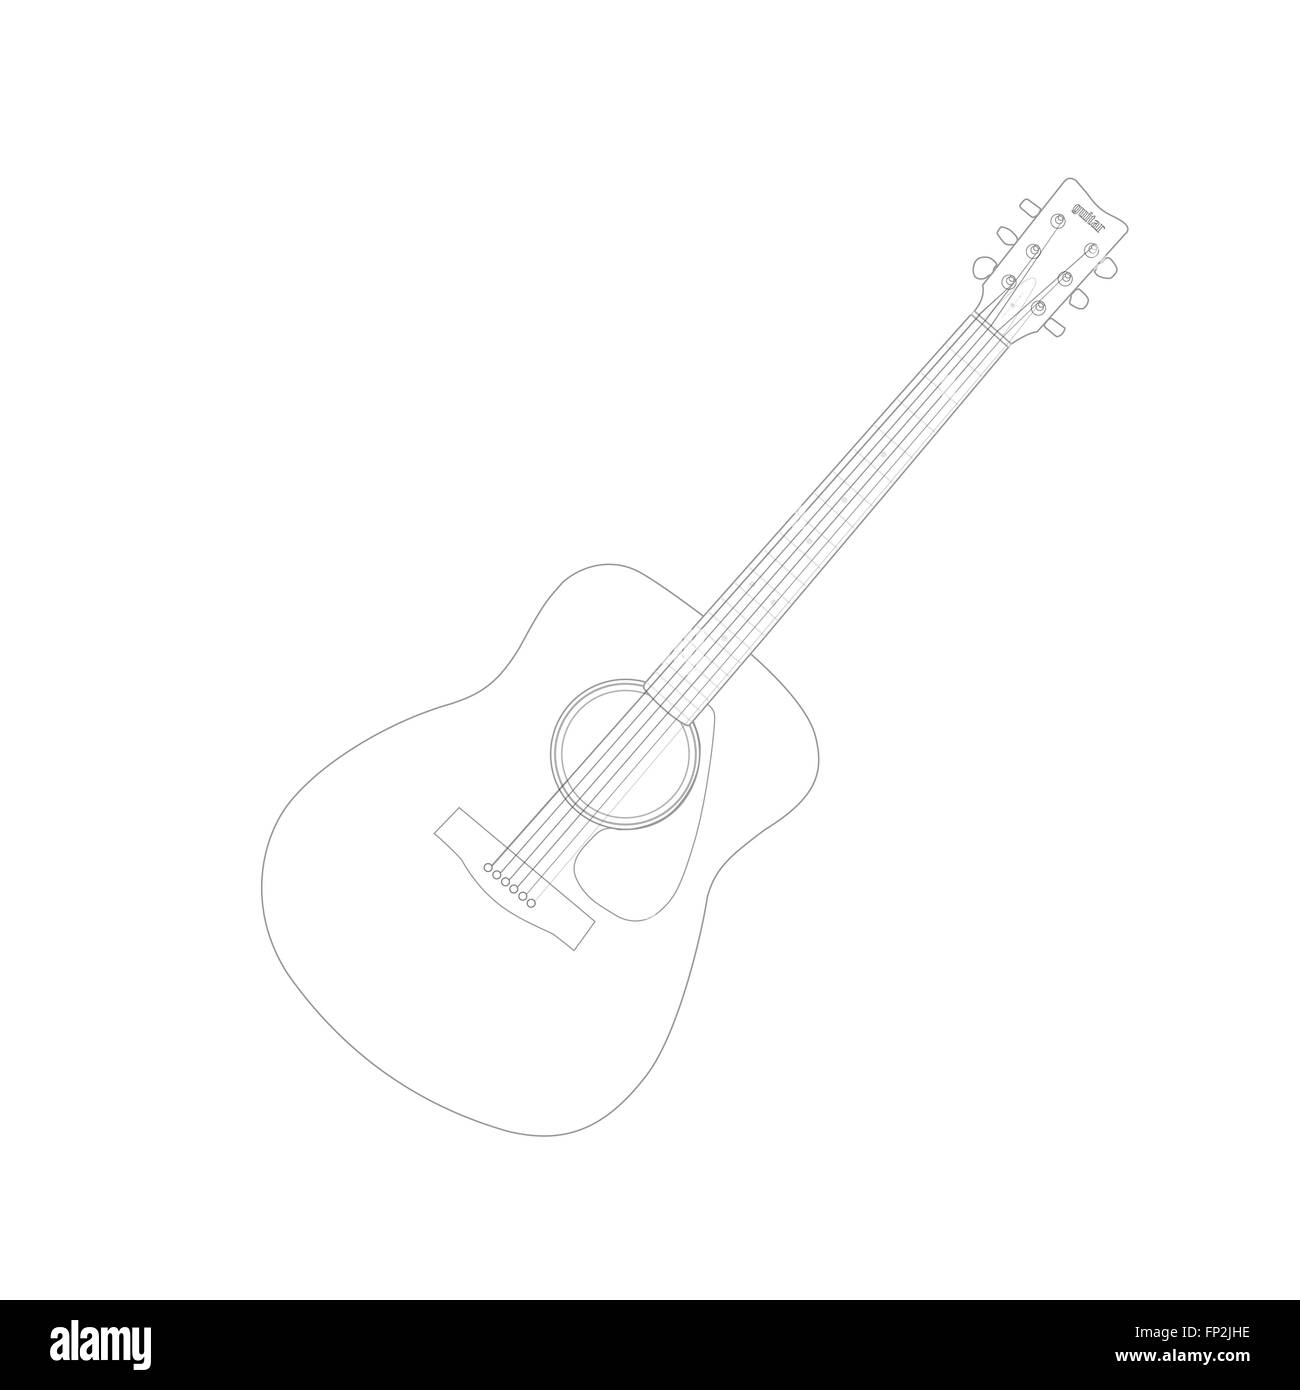 Vector Illustration of an acoustic guitar drawing isolated on a white background. Stock Vector